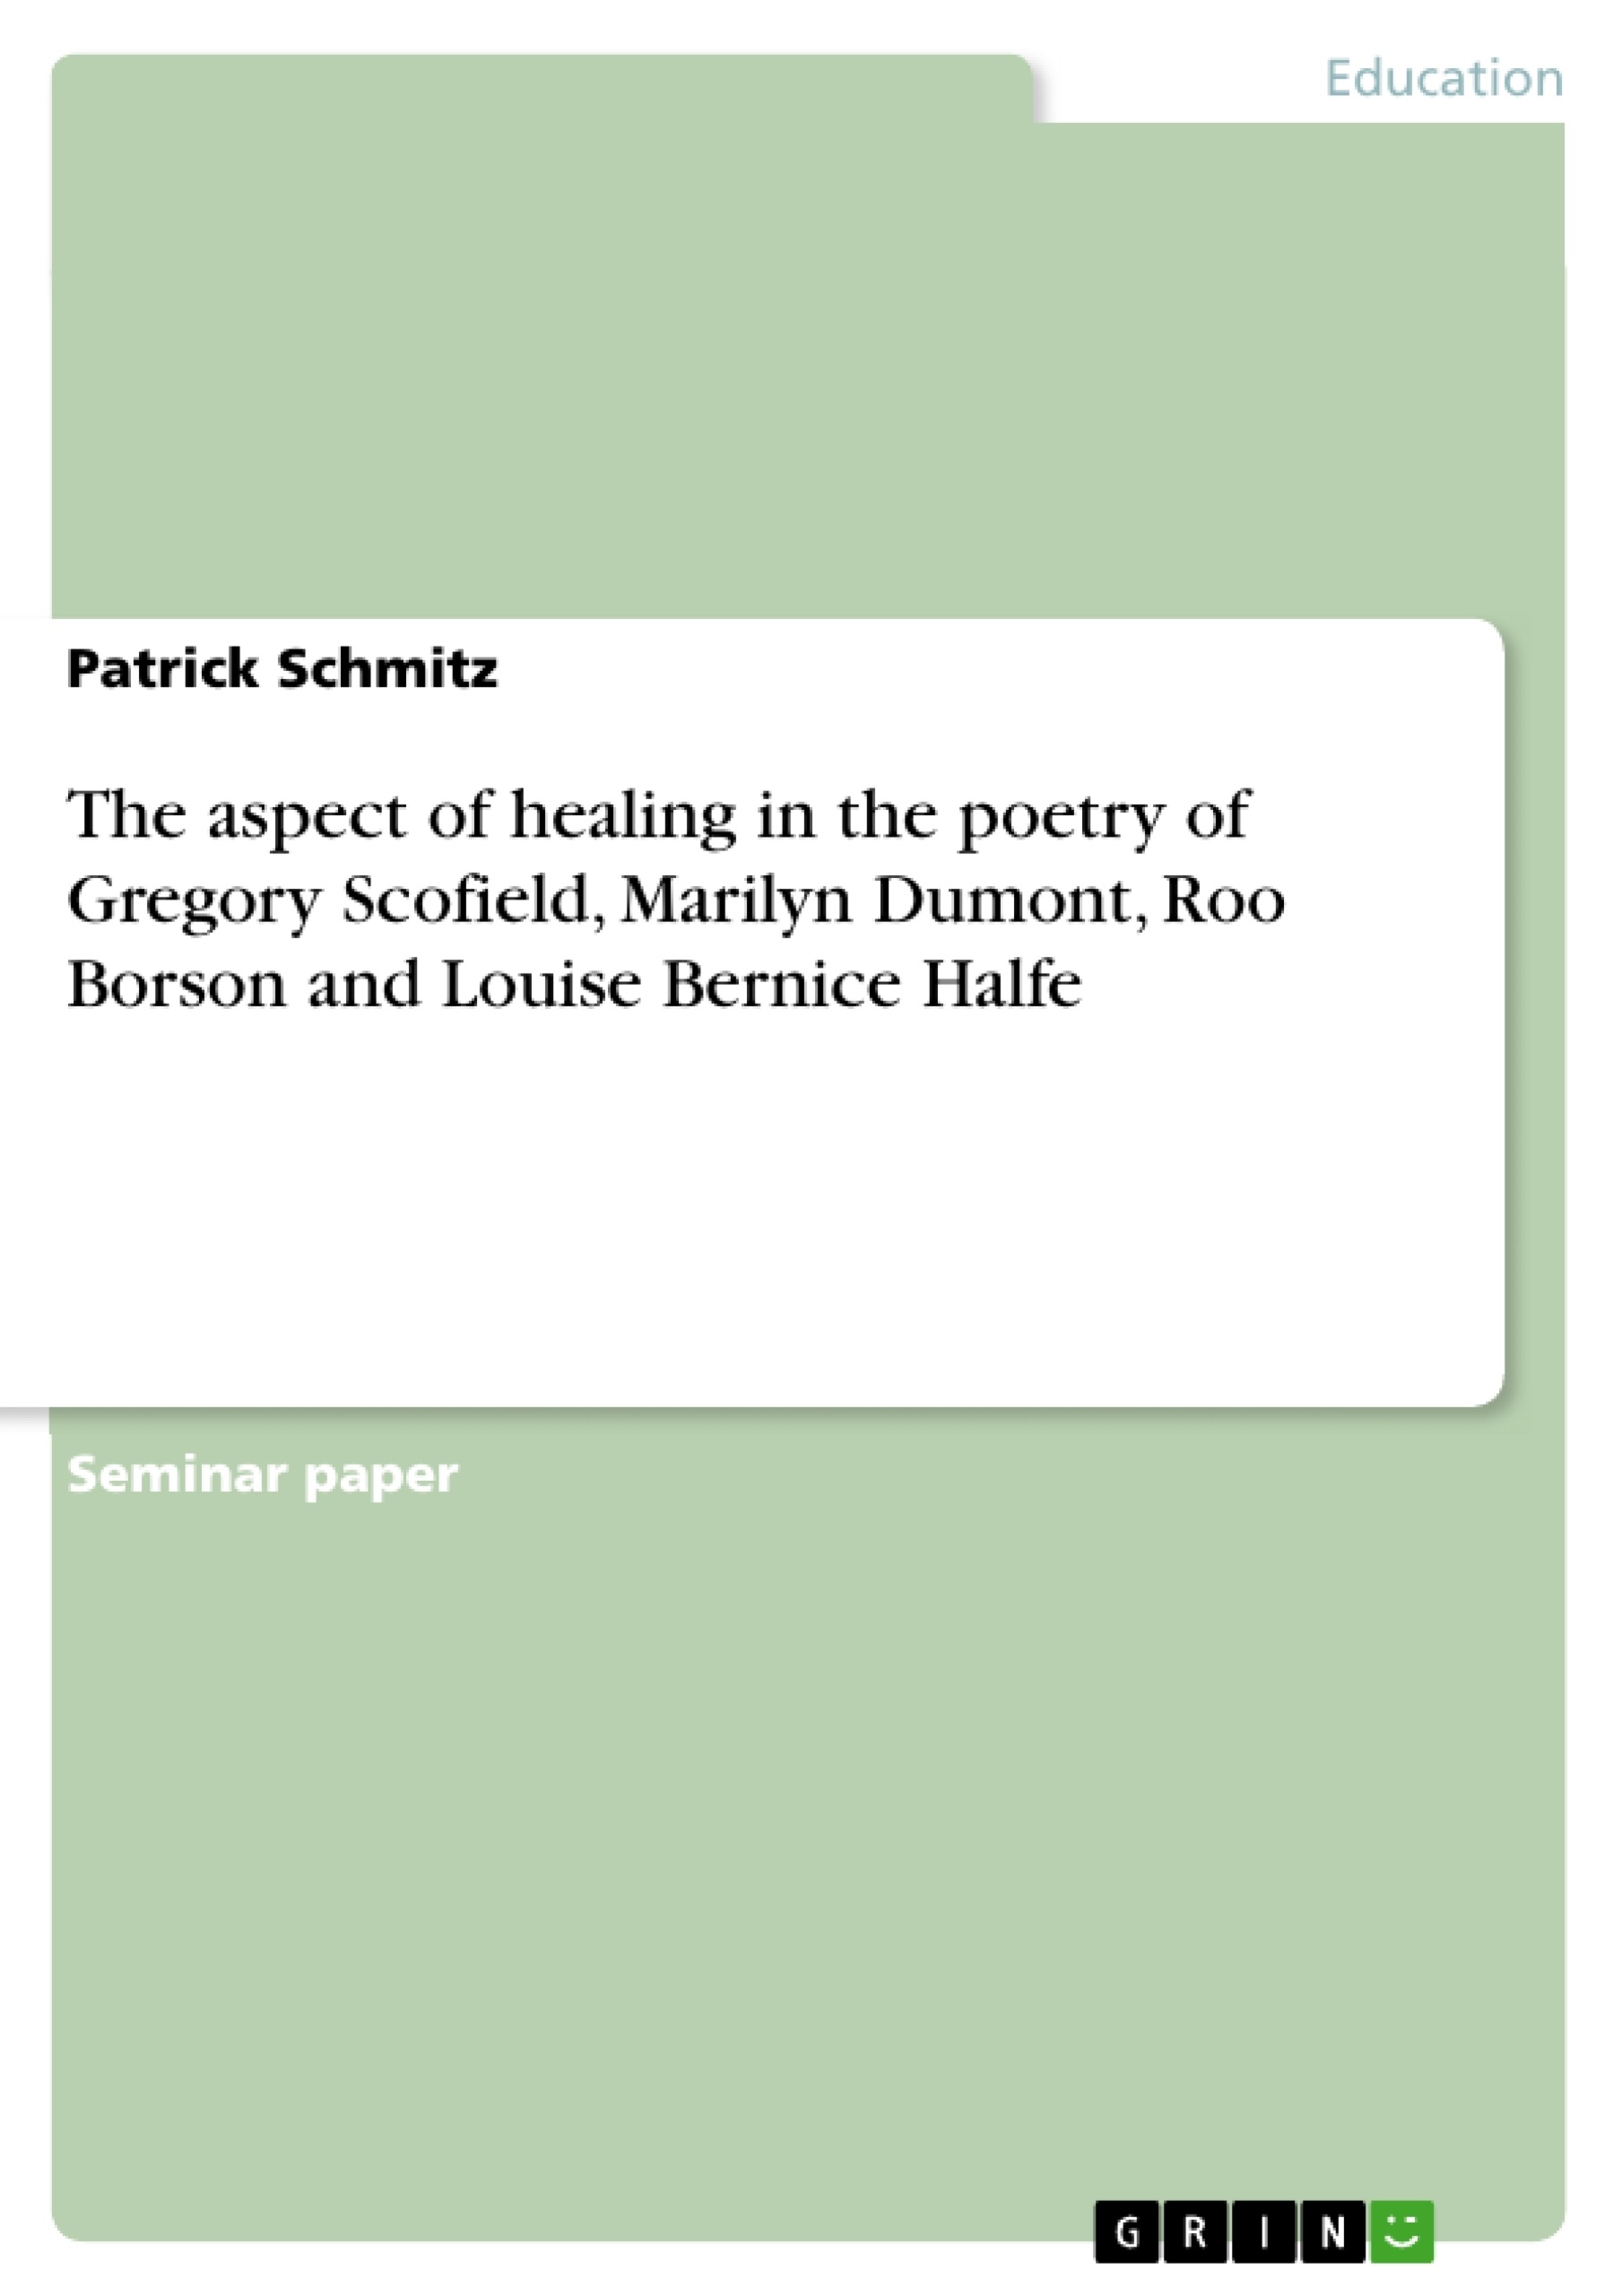 Título: The aspect of healing in the poetry of Gregory Scofield, Marilyn Dumont, Roo Borson and Louise Bernice Halfe 